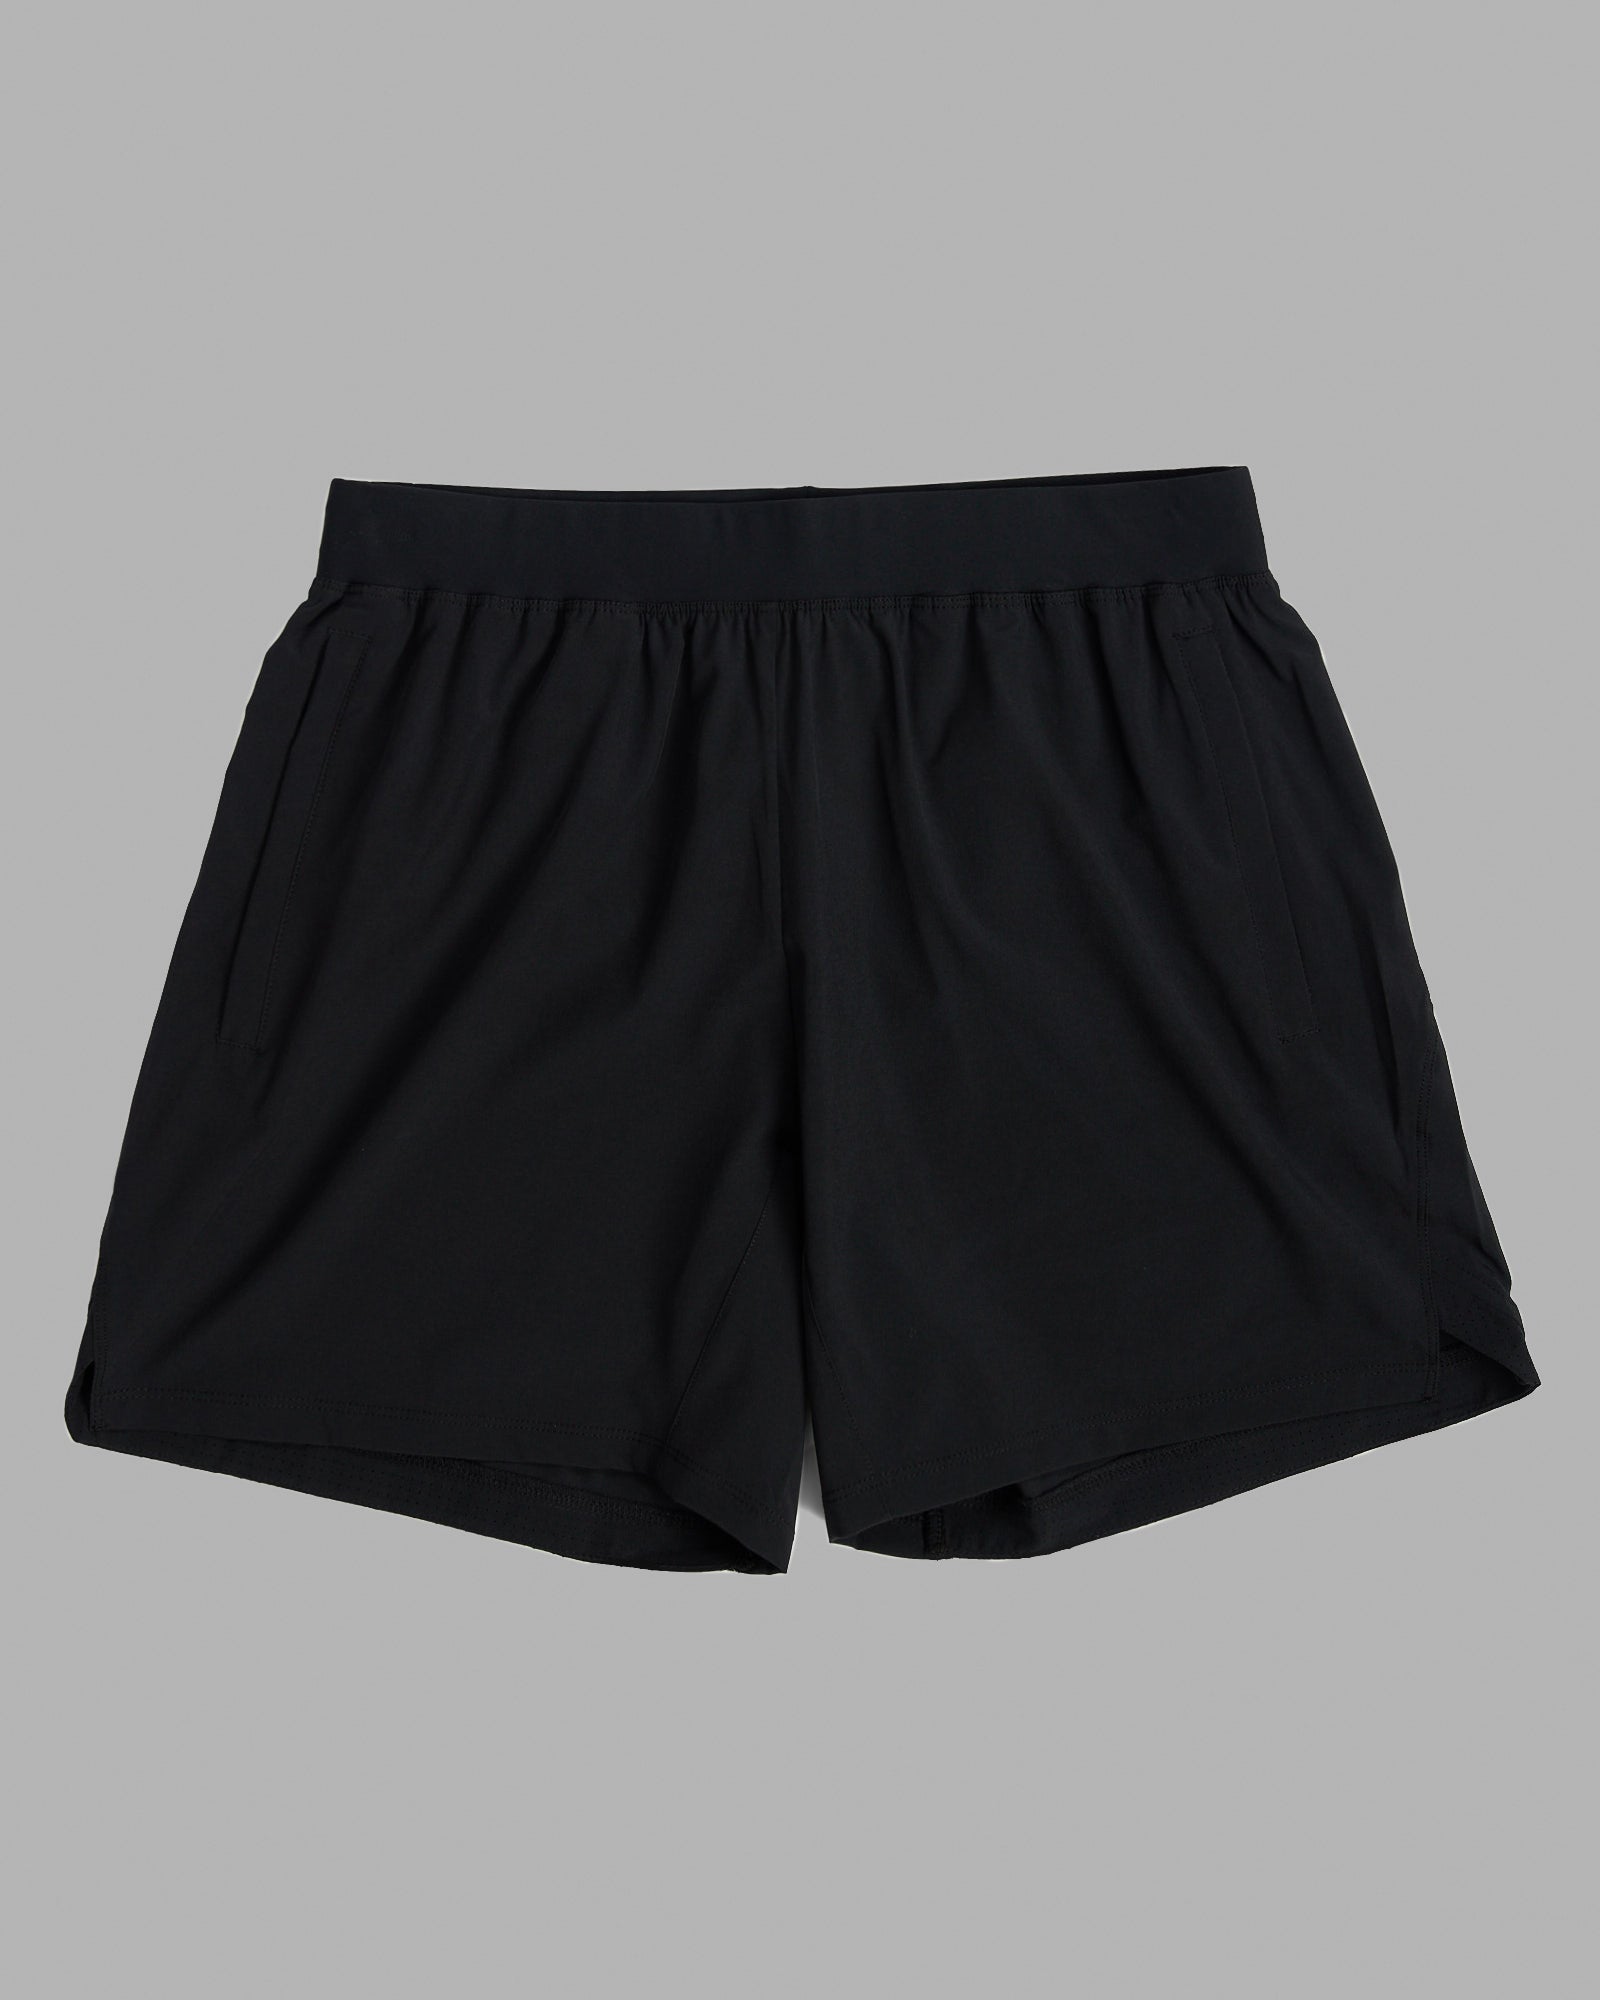 Reel Legends Performance Outfitters. Black Pull On Athletic Shorts